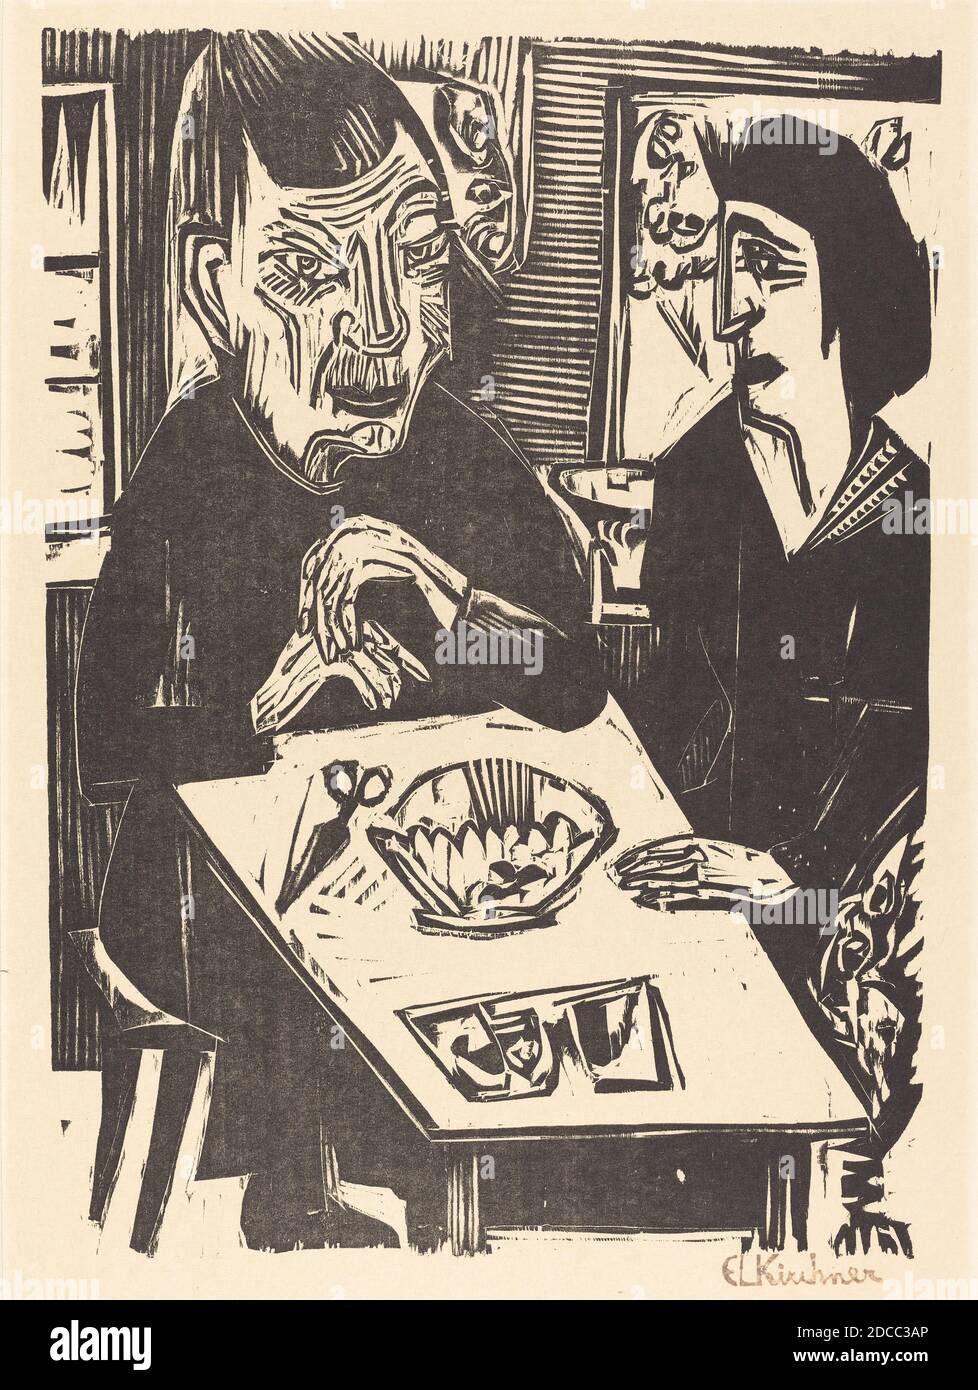 Ernst Ludwig Kirchner, (artist), German, 1880 - 1938, Old and Young Woman (Alte und jungere Frau), 1921, woodcut Stock Photo